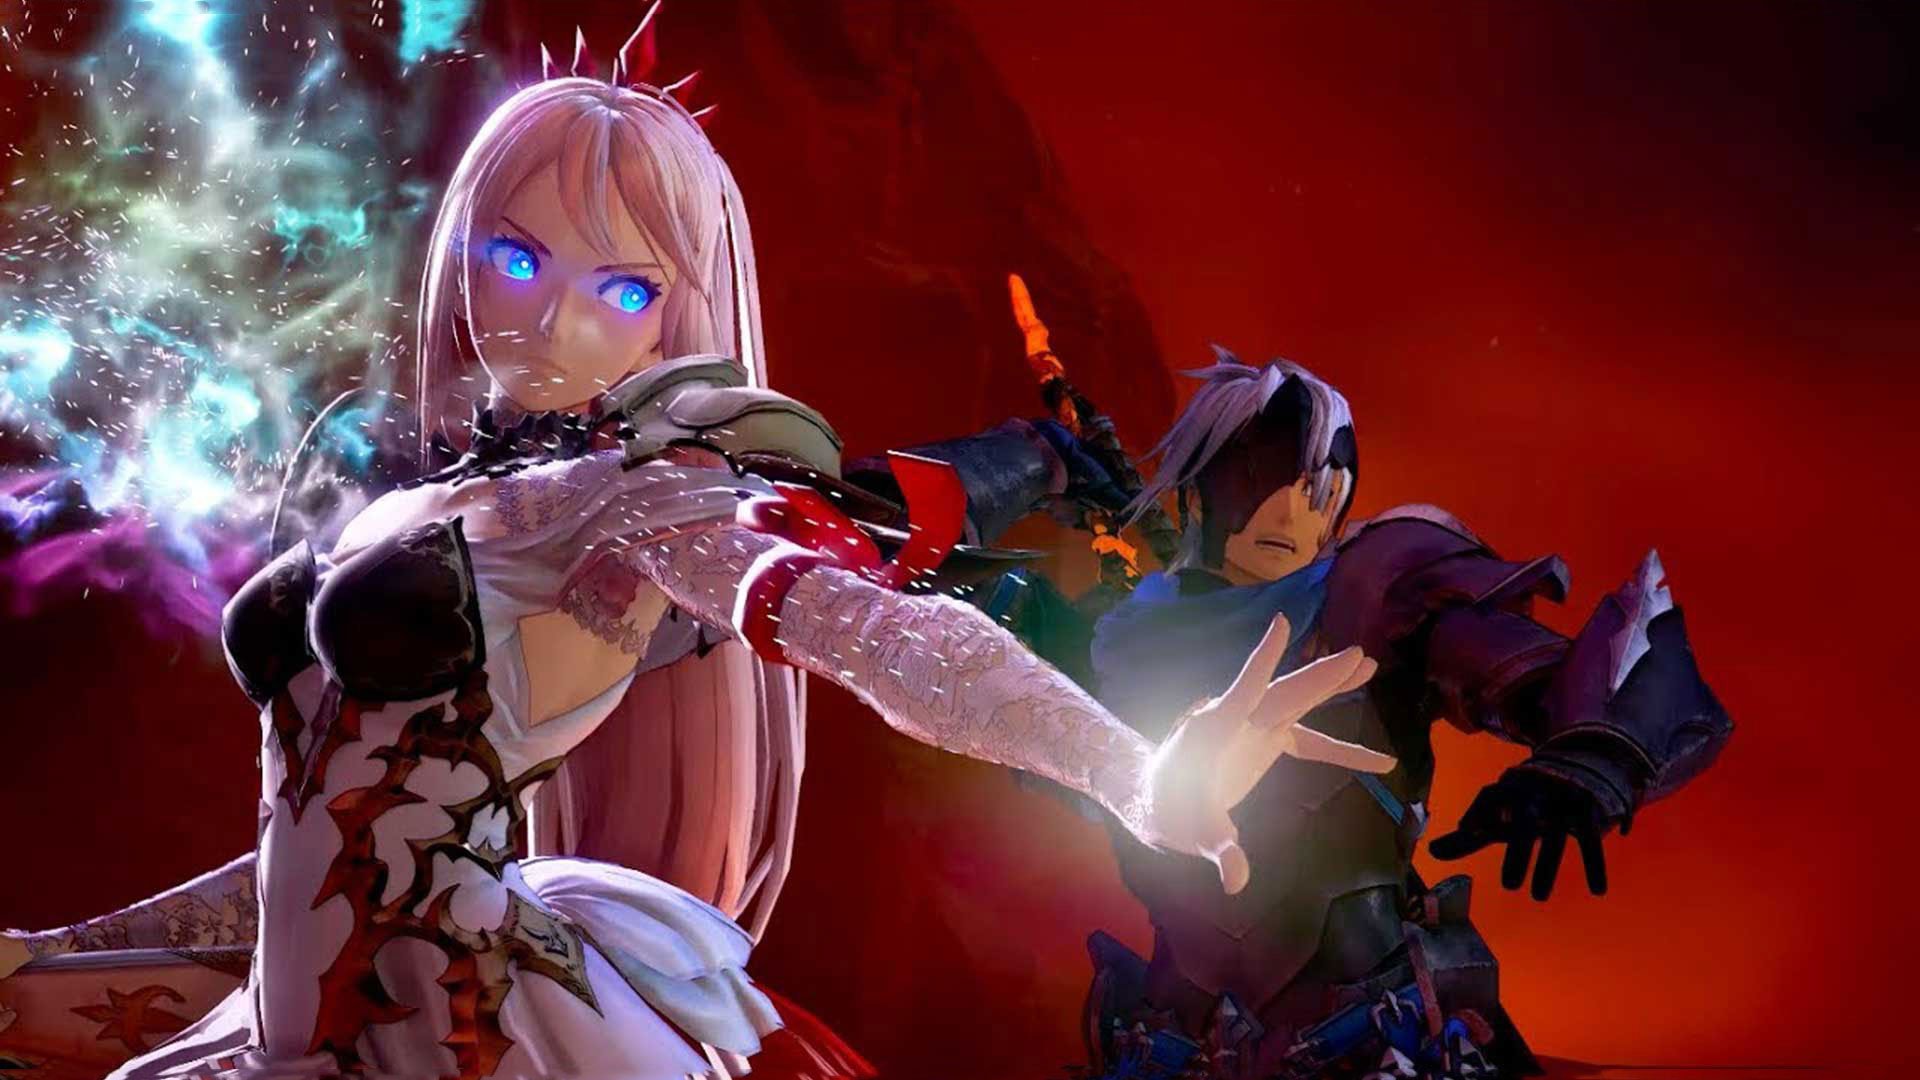 Free Tales of Arise Wallpaper in 1920x1080